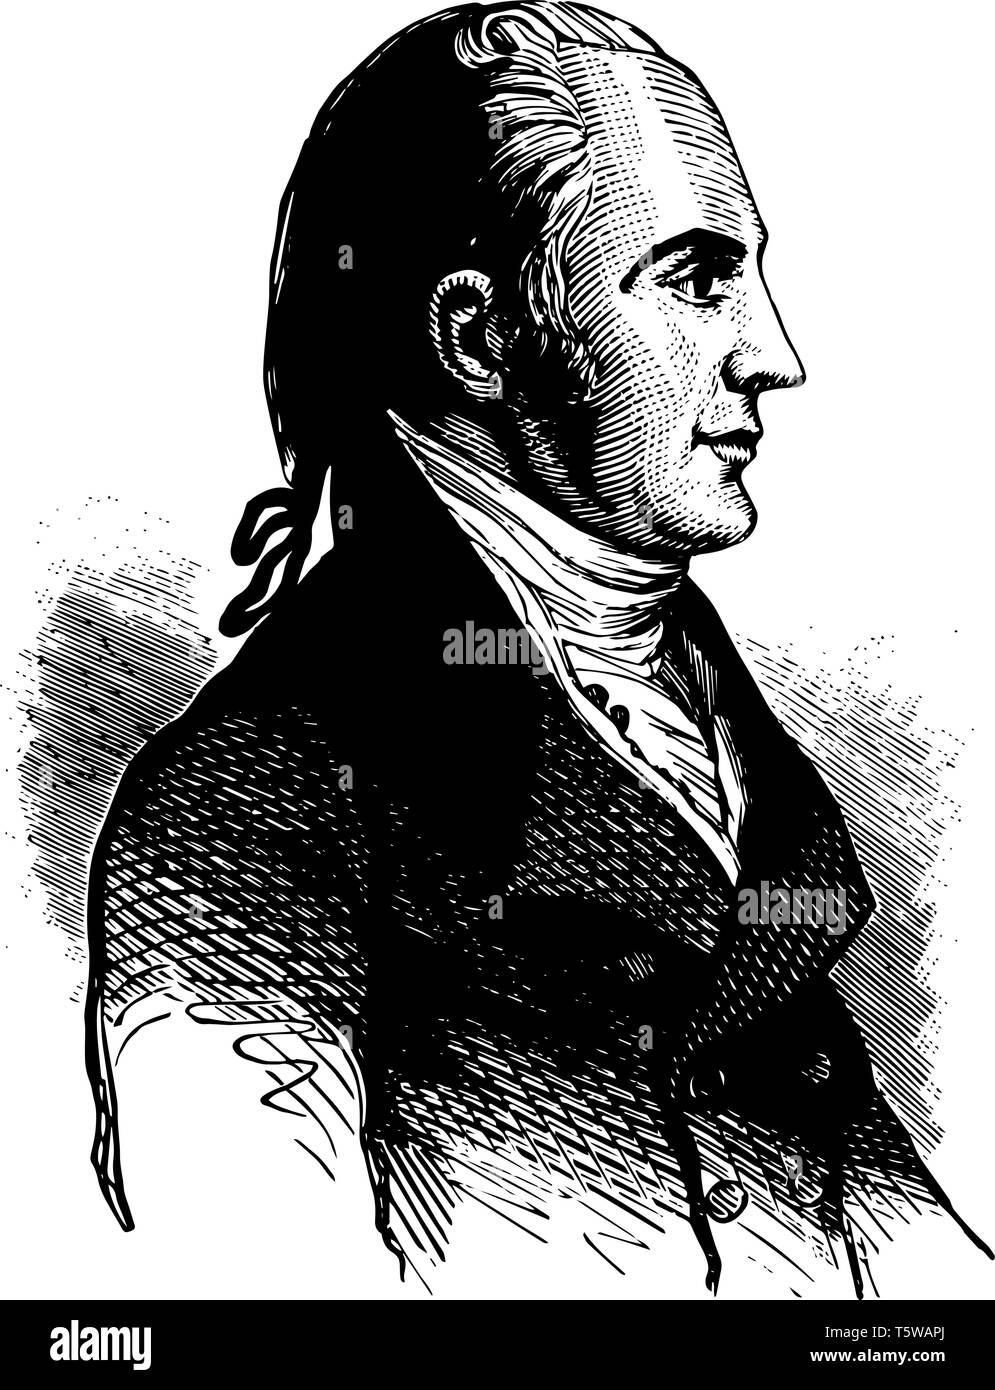 Aaron Burr 1756 to 1836 he was an American politician third Vice President of the United States from 1801 to 1805 attorney general and U.S. senator fr Stock Vector